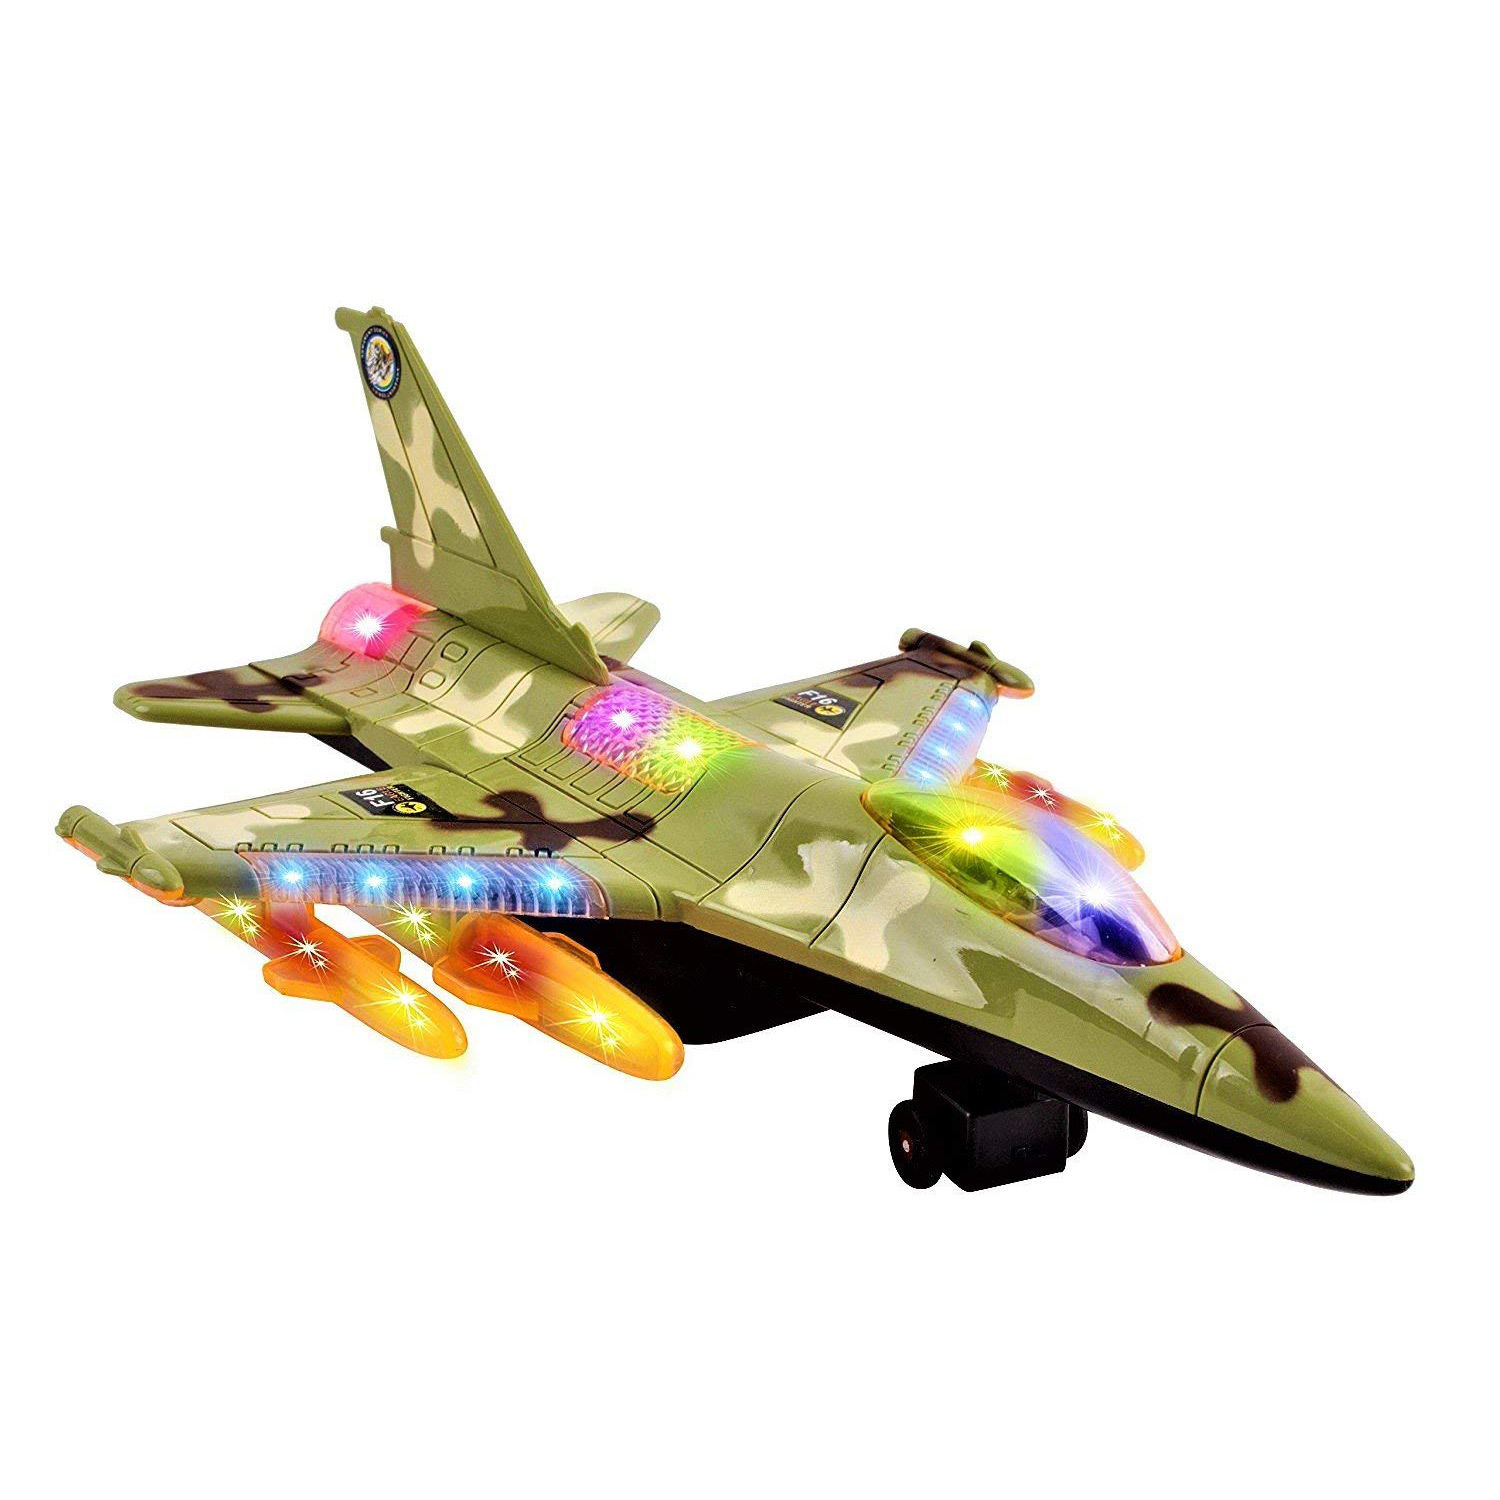 Toy Army Air Force Fighter Jet F16 Battery Operated Kid's Bump and Go Toy Plane With Flashing Lights And Sounds Bumps Into Something and Will Change Direction Perfect For Boys And Girls (Green)